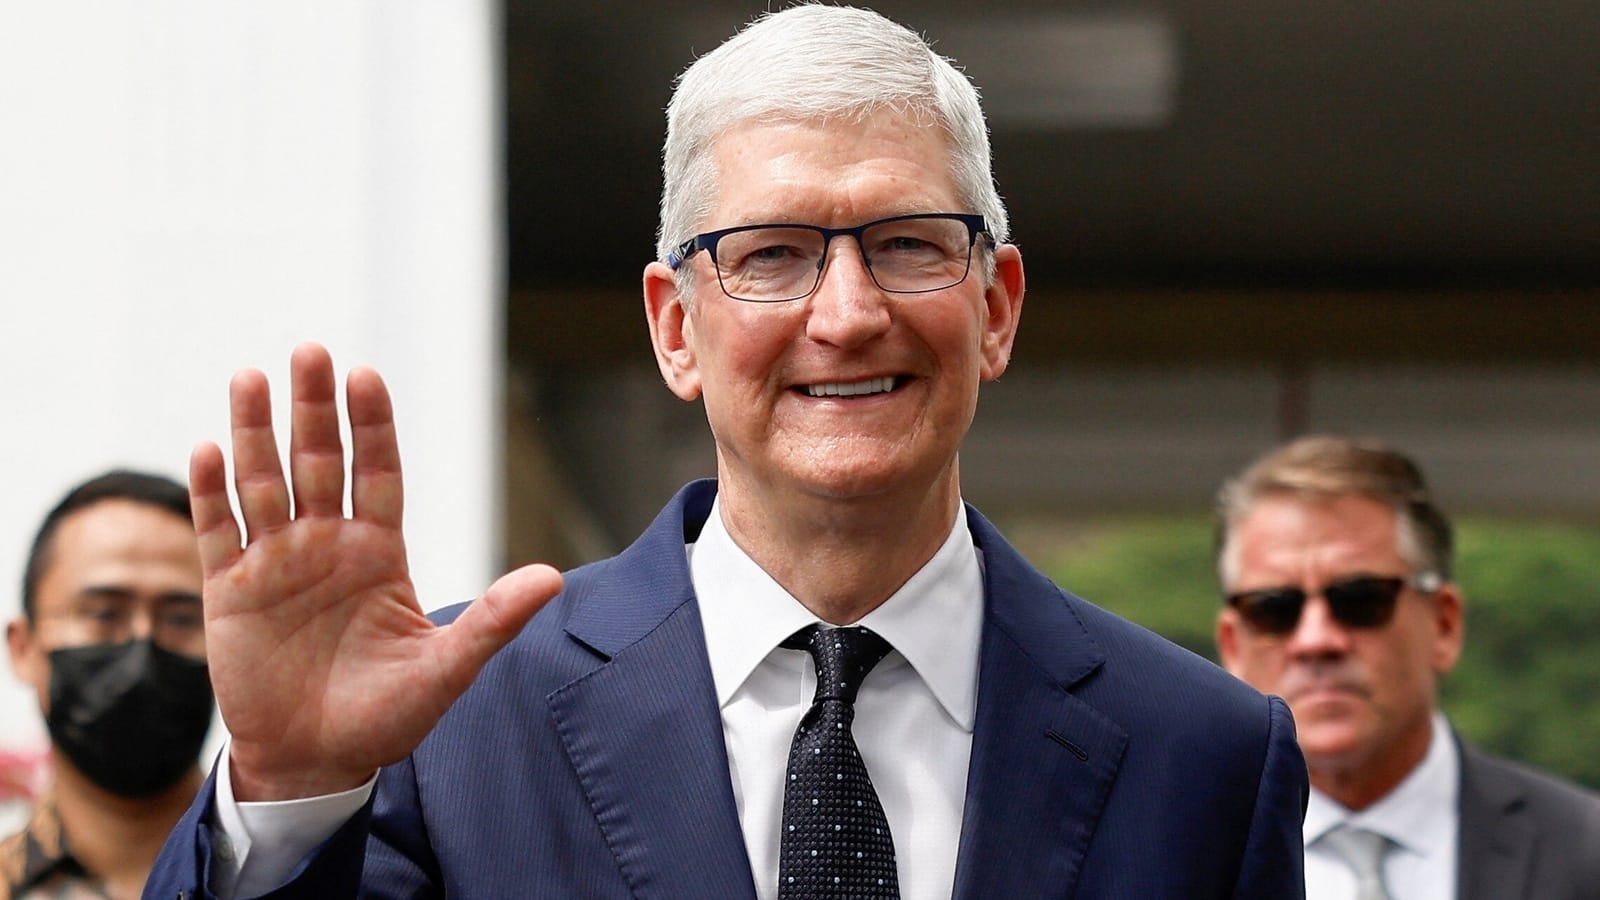 Tim Cook announces Apple’s relief efforts for Brazil floods: ‘My heart goes out to…’